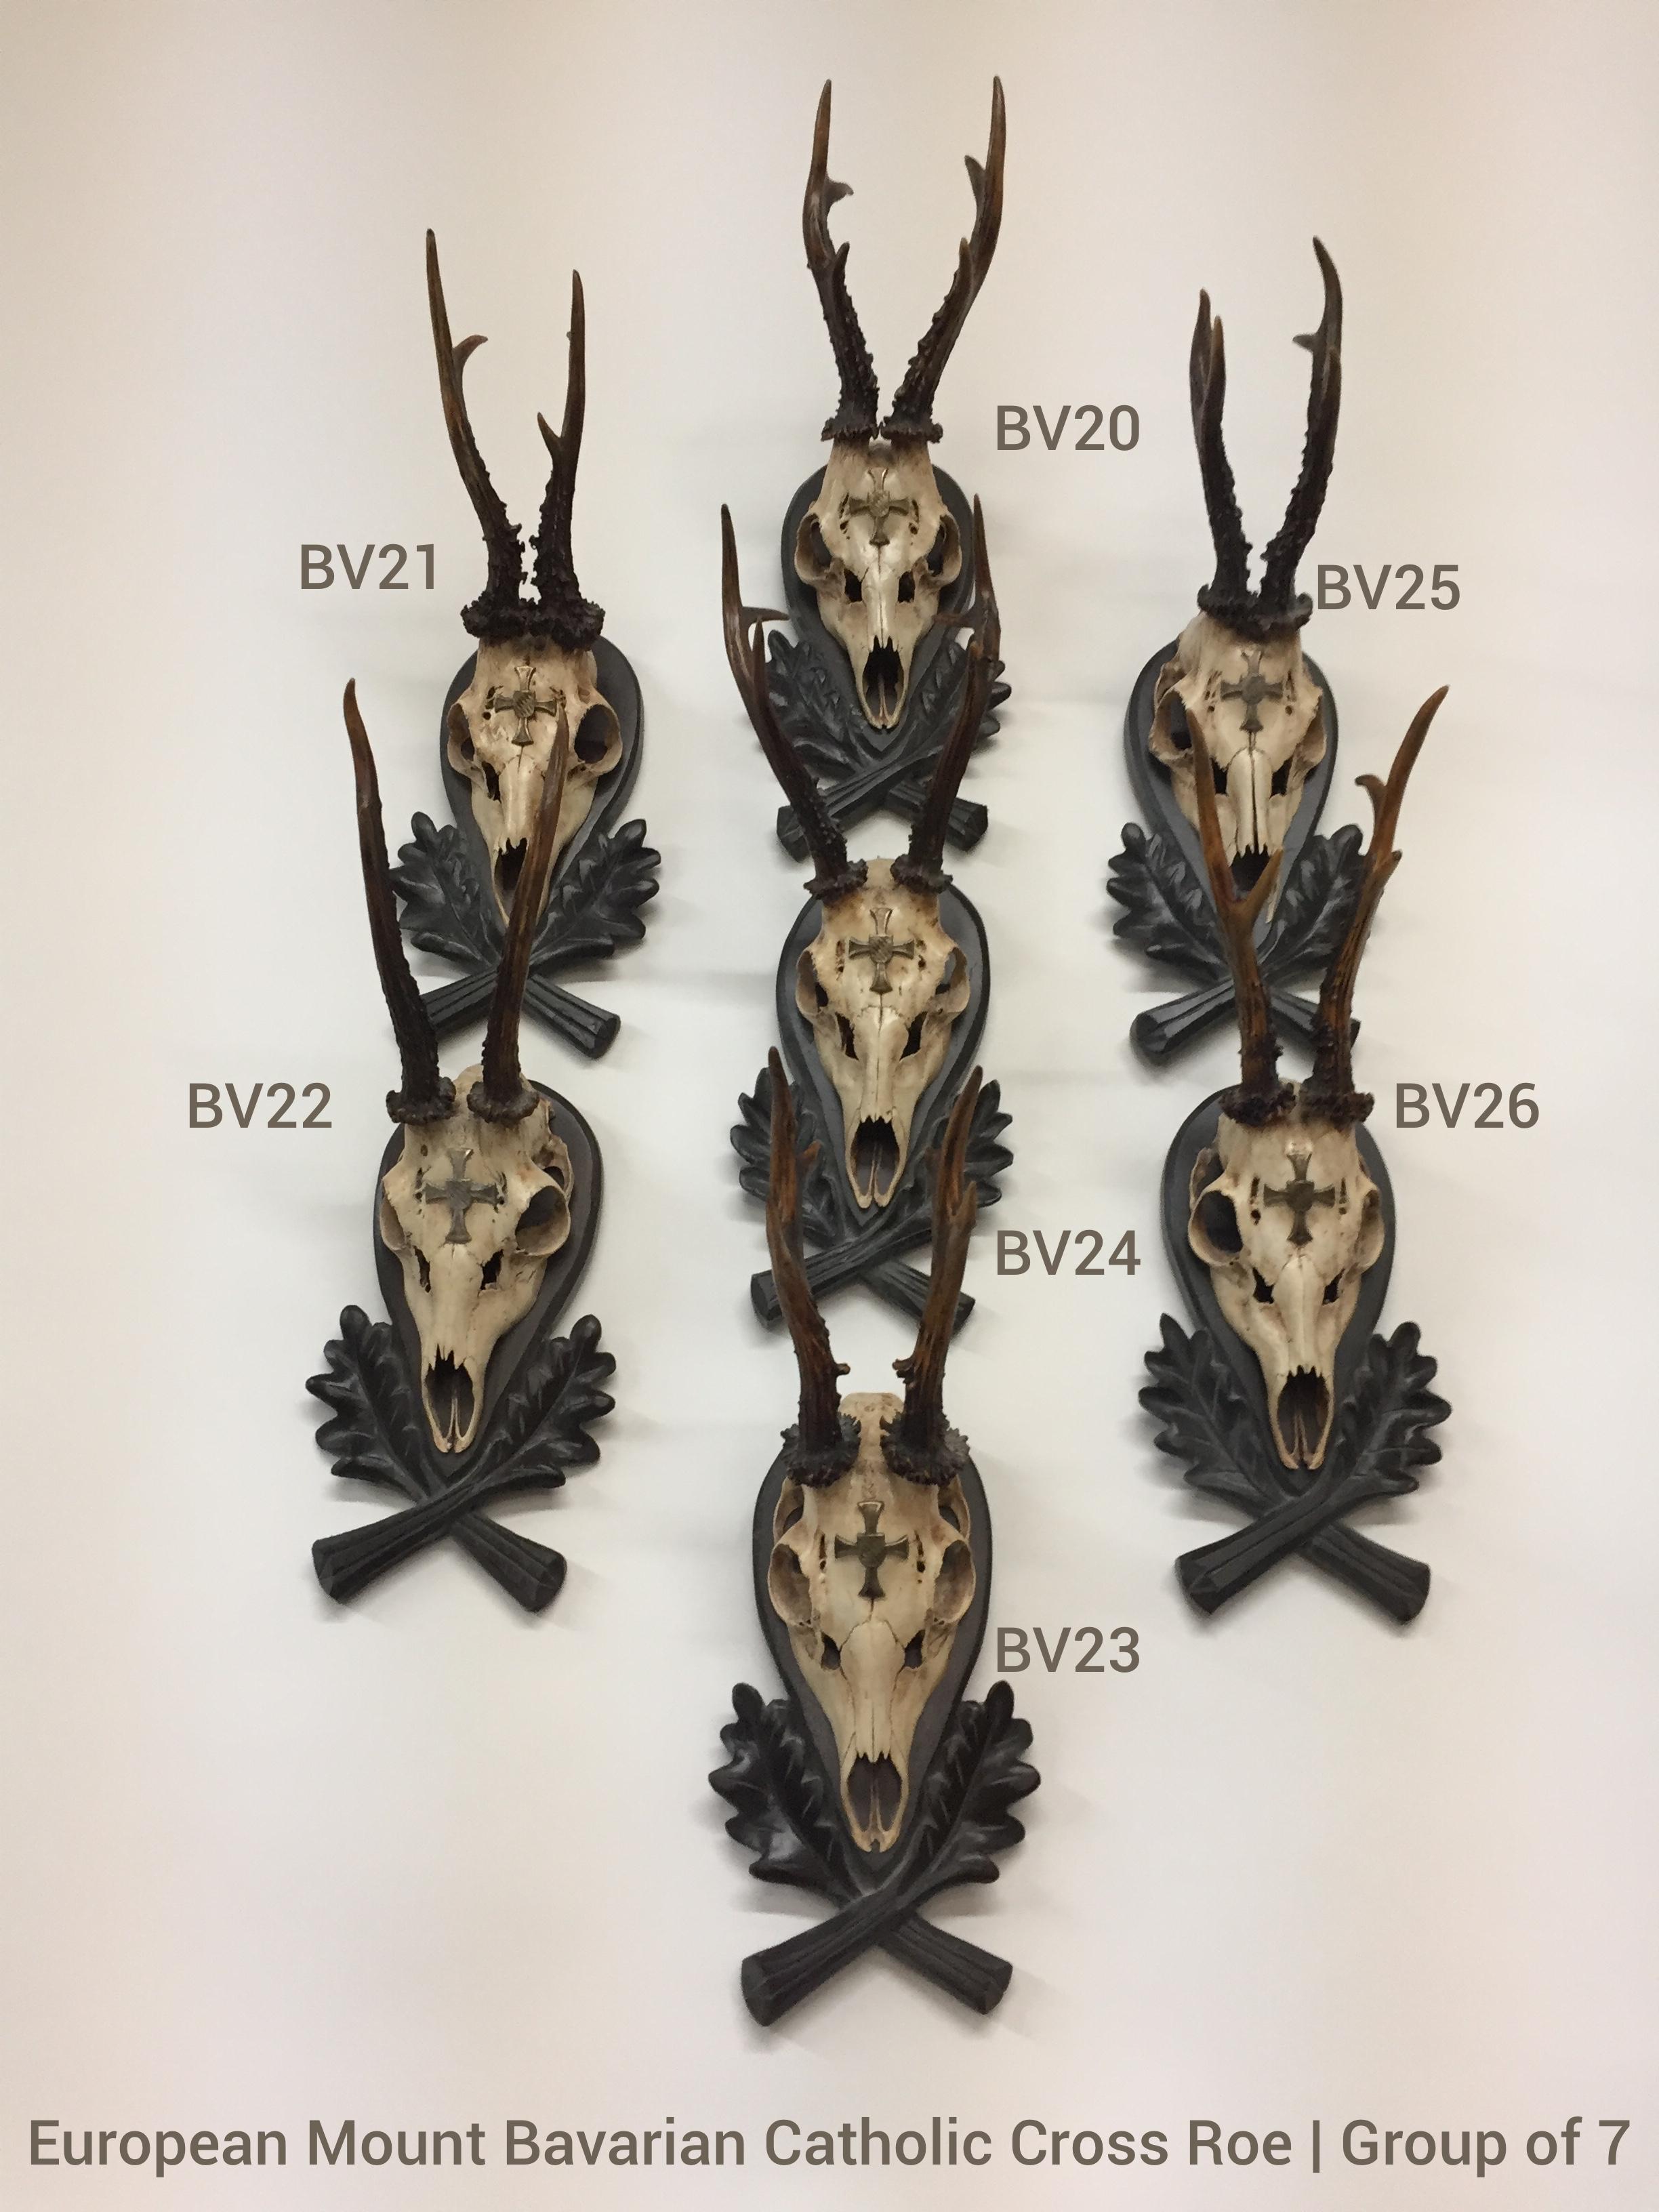 An extraordinary grouping of European Mount Roe Trophies, attributed to the Bavarian Kings. These 19th century Roe Trophies are mounted on hand-carved Black Forest plaques, and are decorated with a Bavarian Catholic Cross wappen on the skull of each